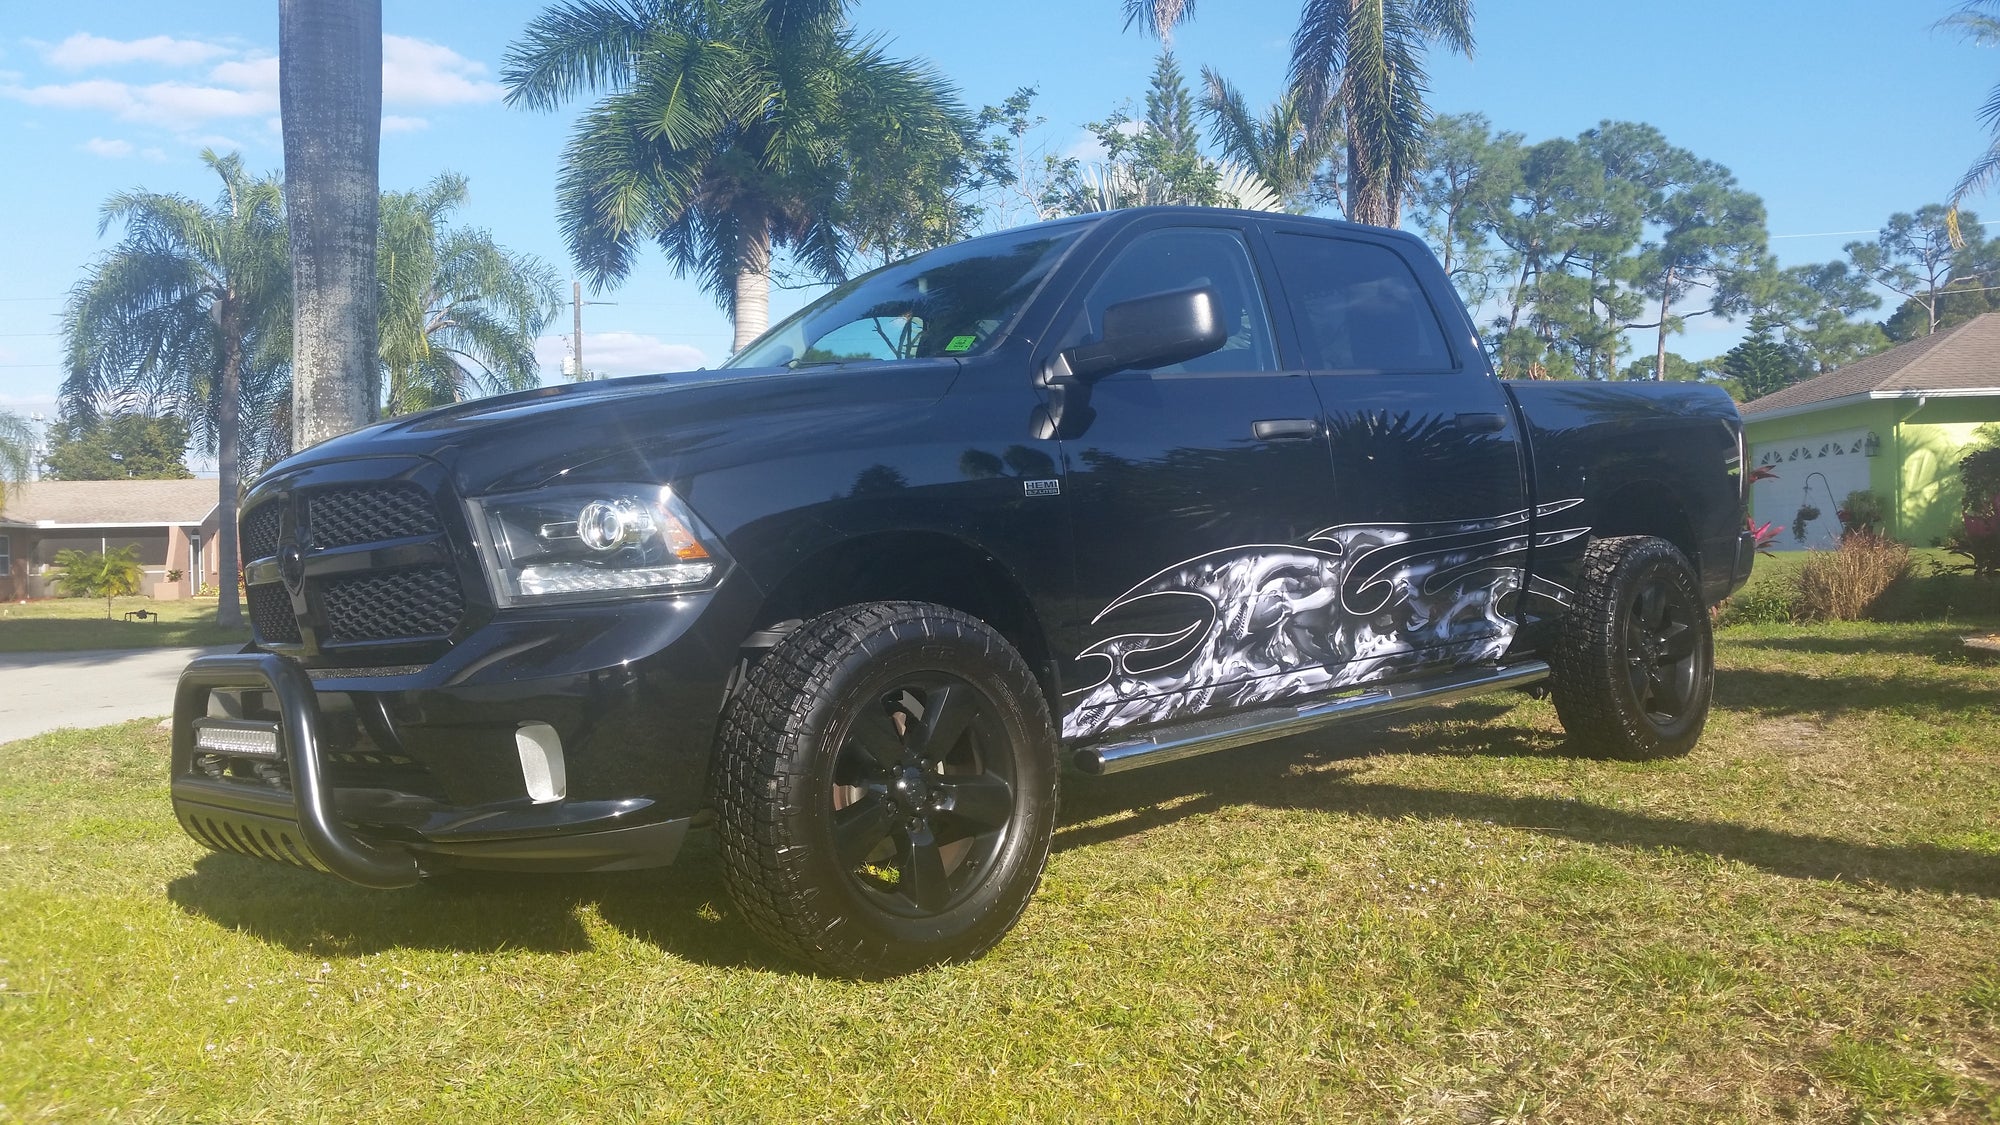 grey dragon attack half wrap on the side of a black dodge black truck